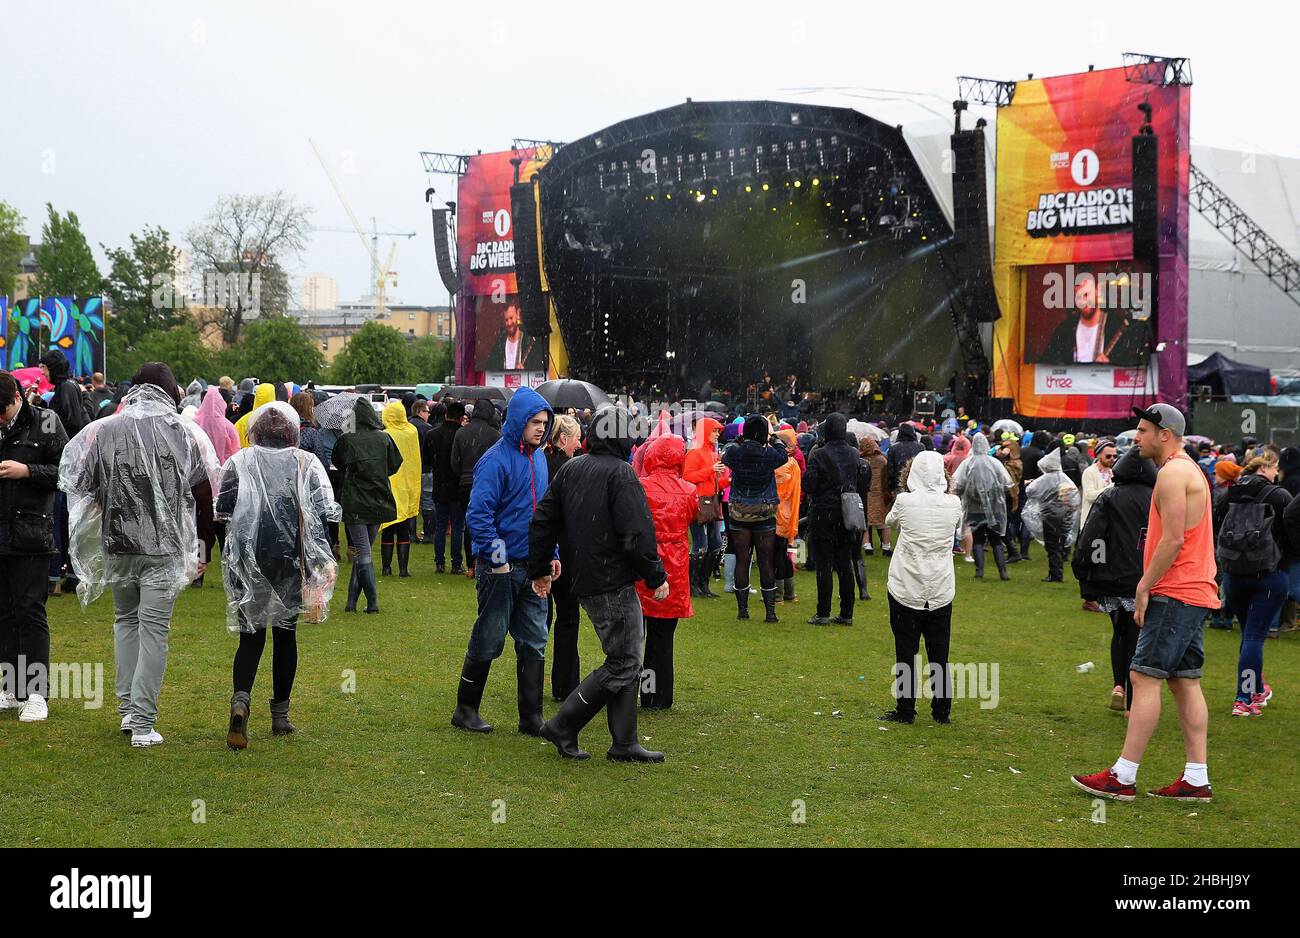 Rainy Weather View of Crowd and Stage during the BBC Radio 1 Big Weekend Festival on Glasgow Green in Glasgow, Scotland. Stock Photo